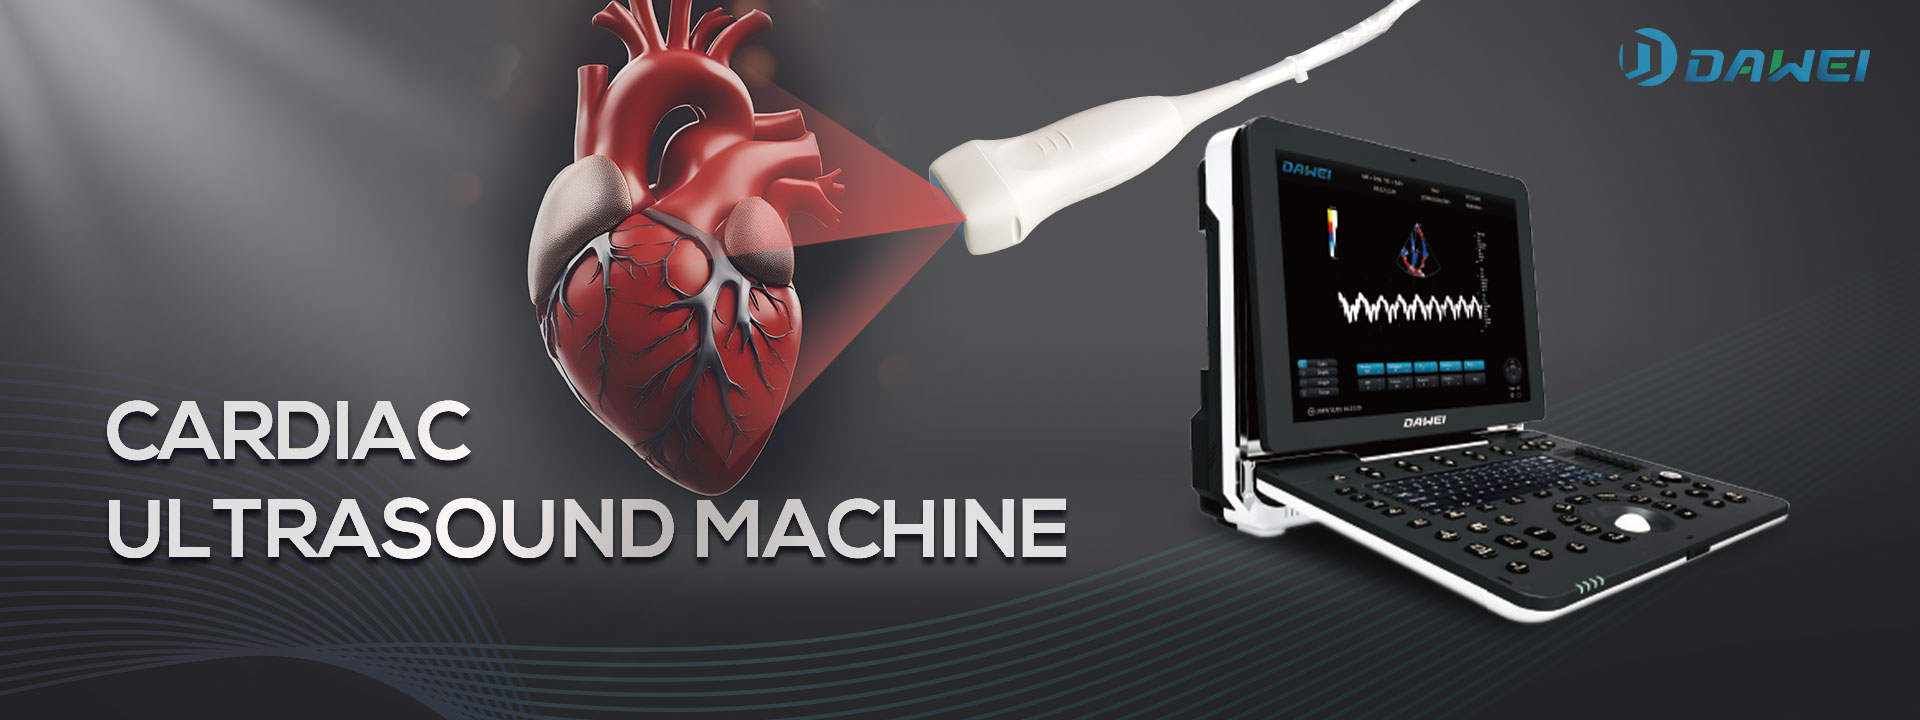 Exploring Cardiac Ultrasound Machine: The Manual of the New Buyer